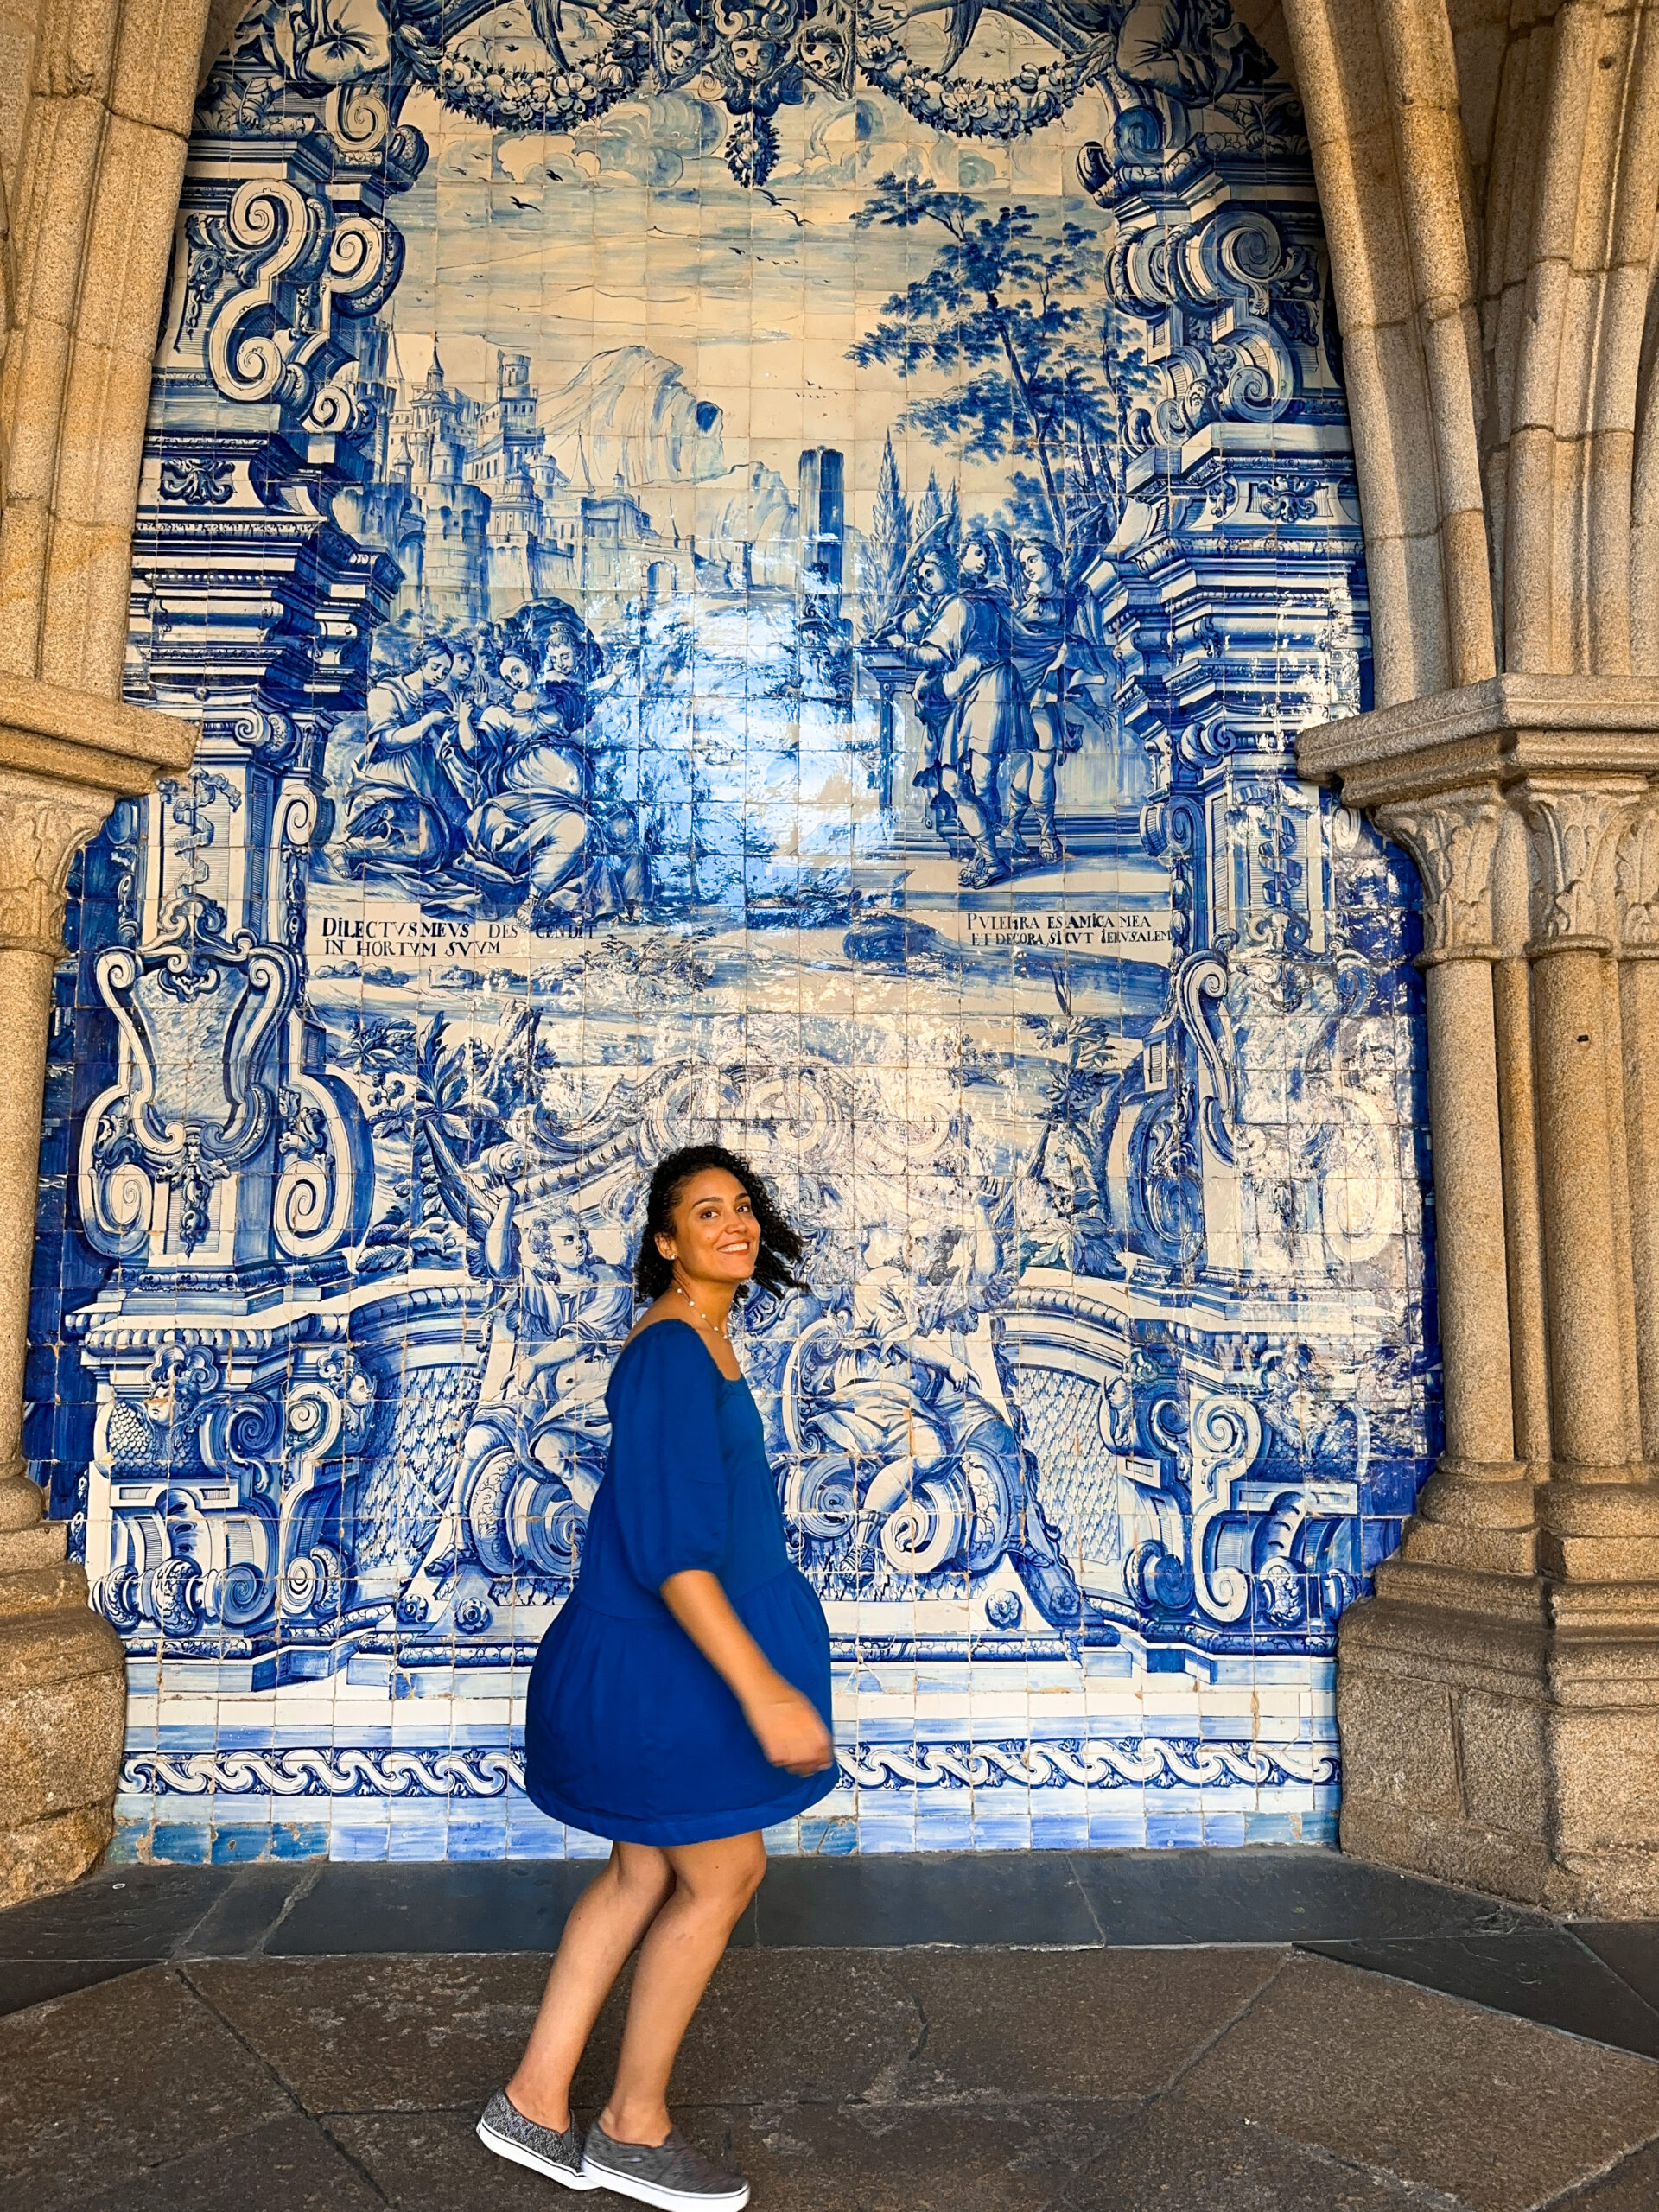 Tile panels at Porto's Cathedral